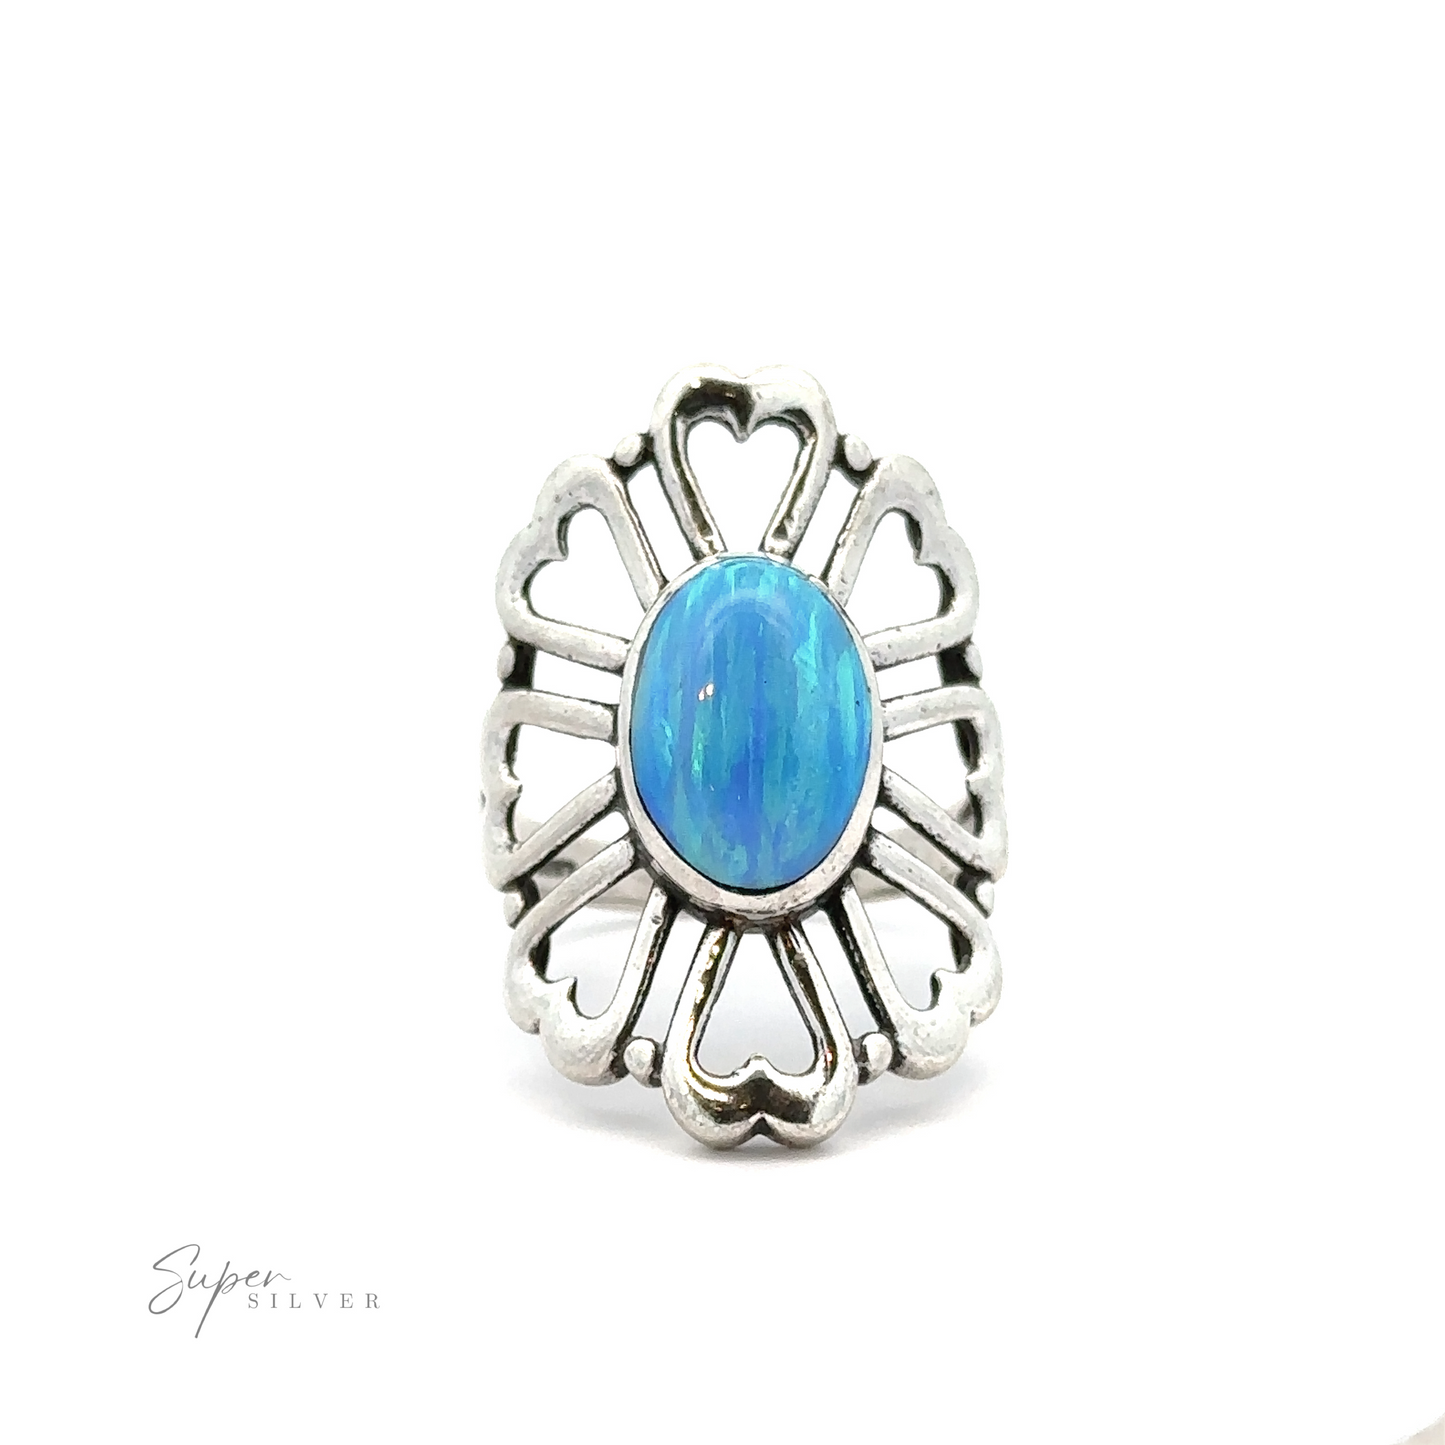 
                  
                    An American Made Opal Flower Ring with Heart Shaped Petals, encircled by heart-shaped motifs and radiating lines, is displayed against a white background. Handcrafted in America, the lower left corner bears the text "Super Silver.
                  
                